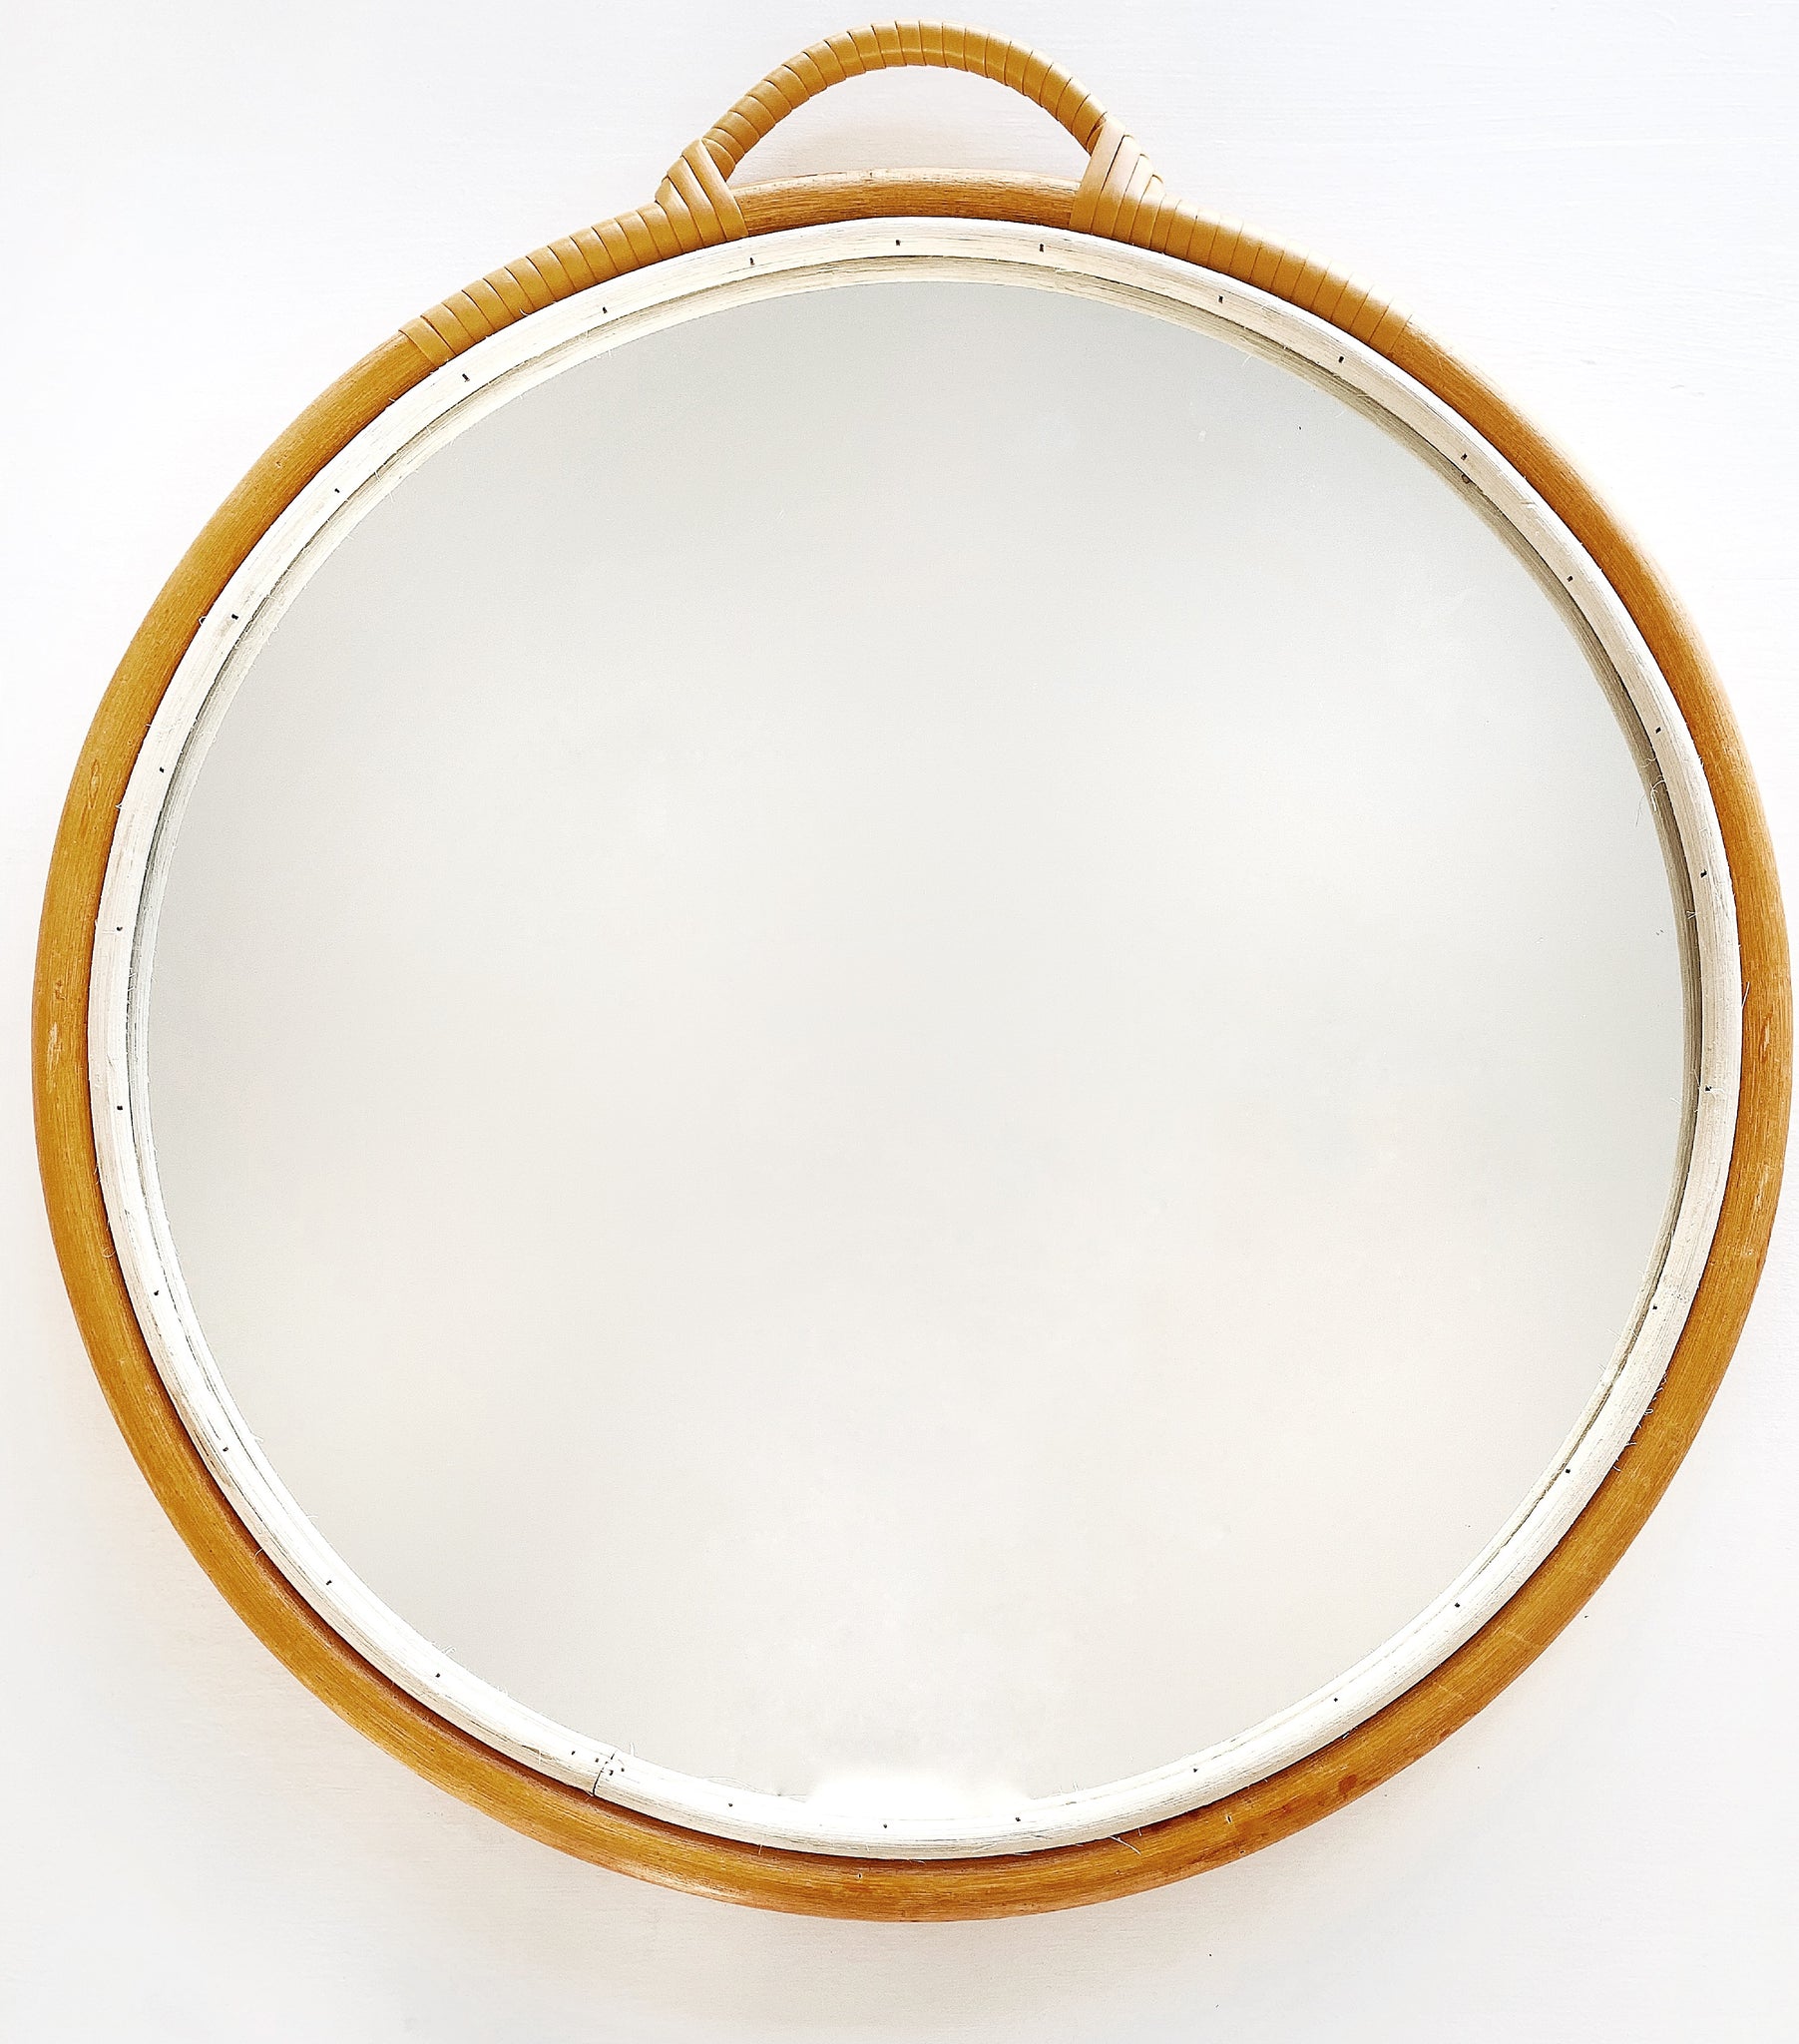 Miss Lucy Rattan Wall Mirror [Sample]